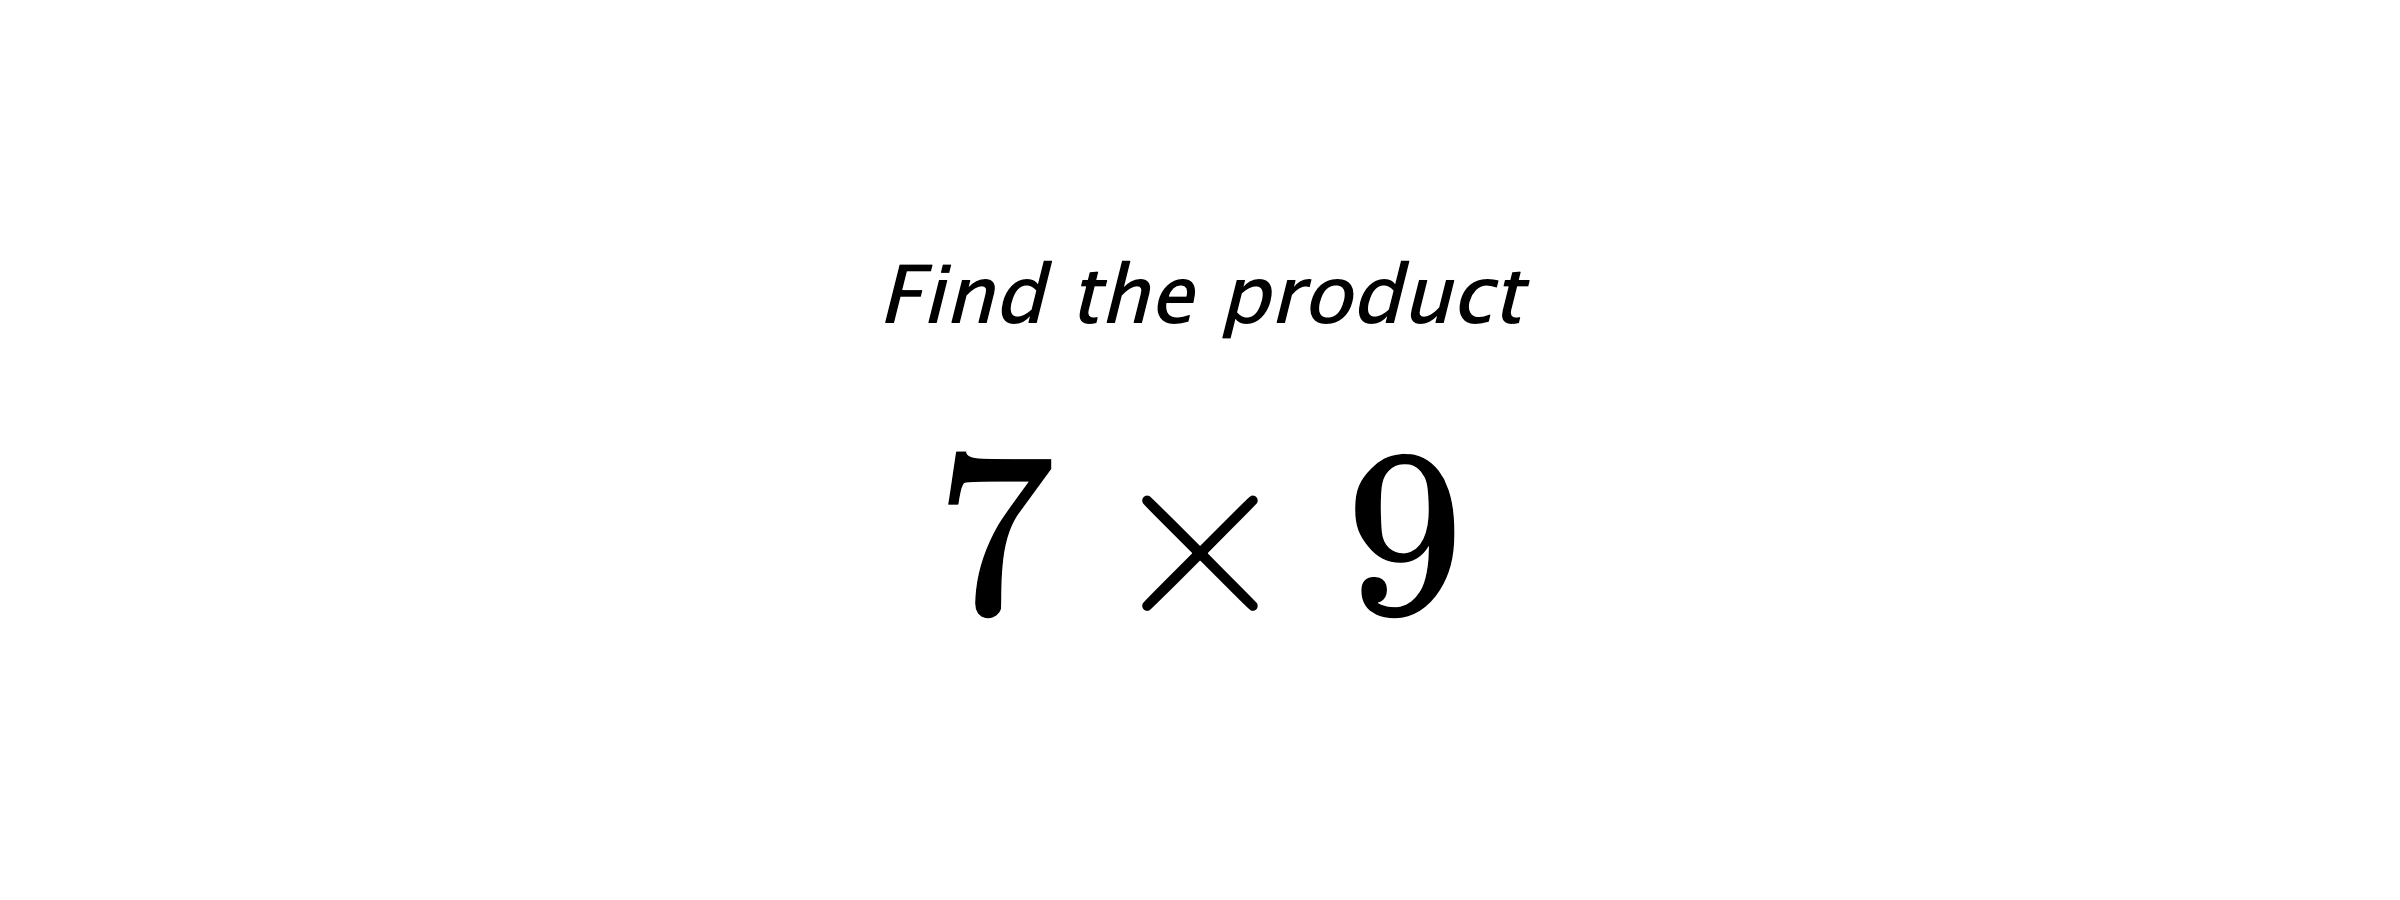 Find the product $ 7 \times 9 $